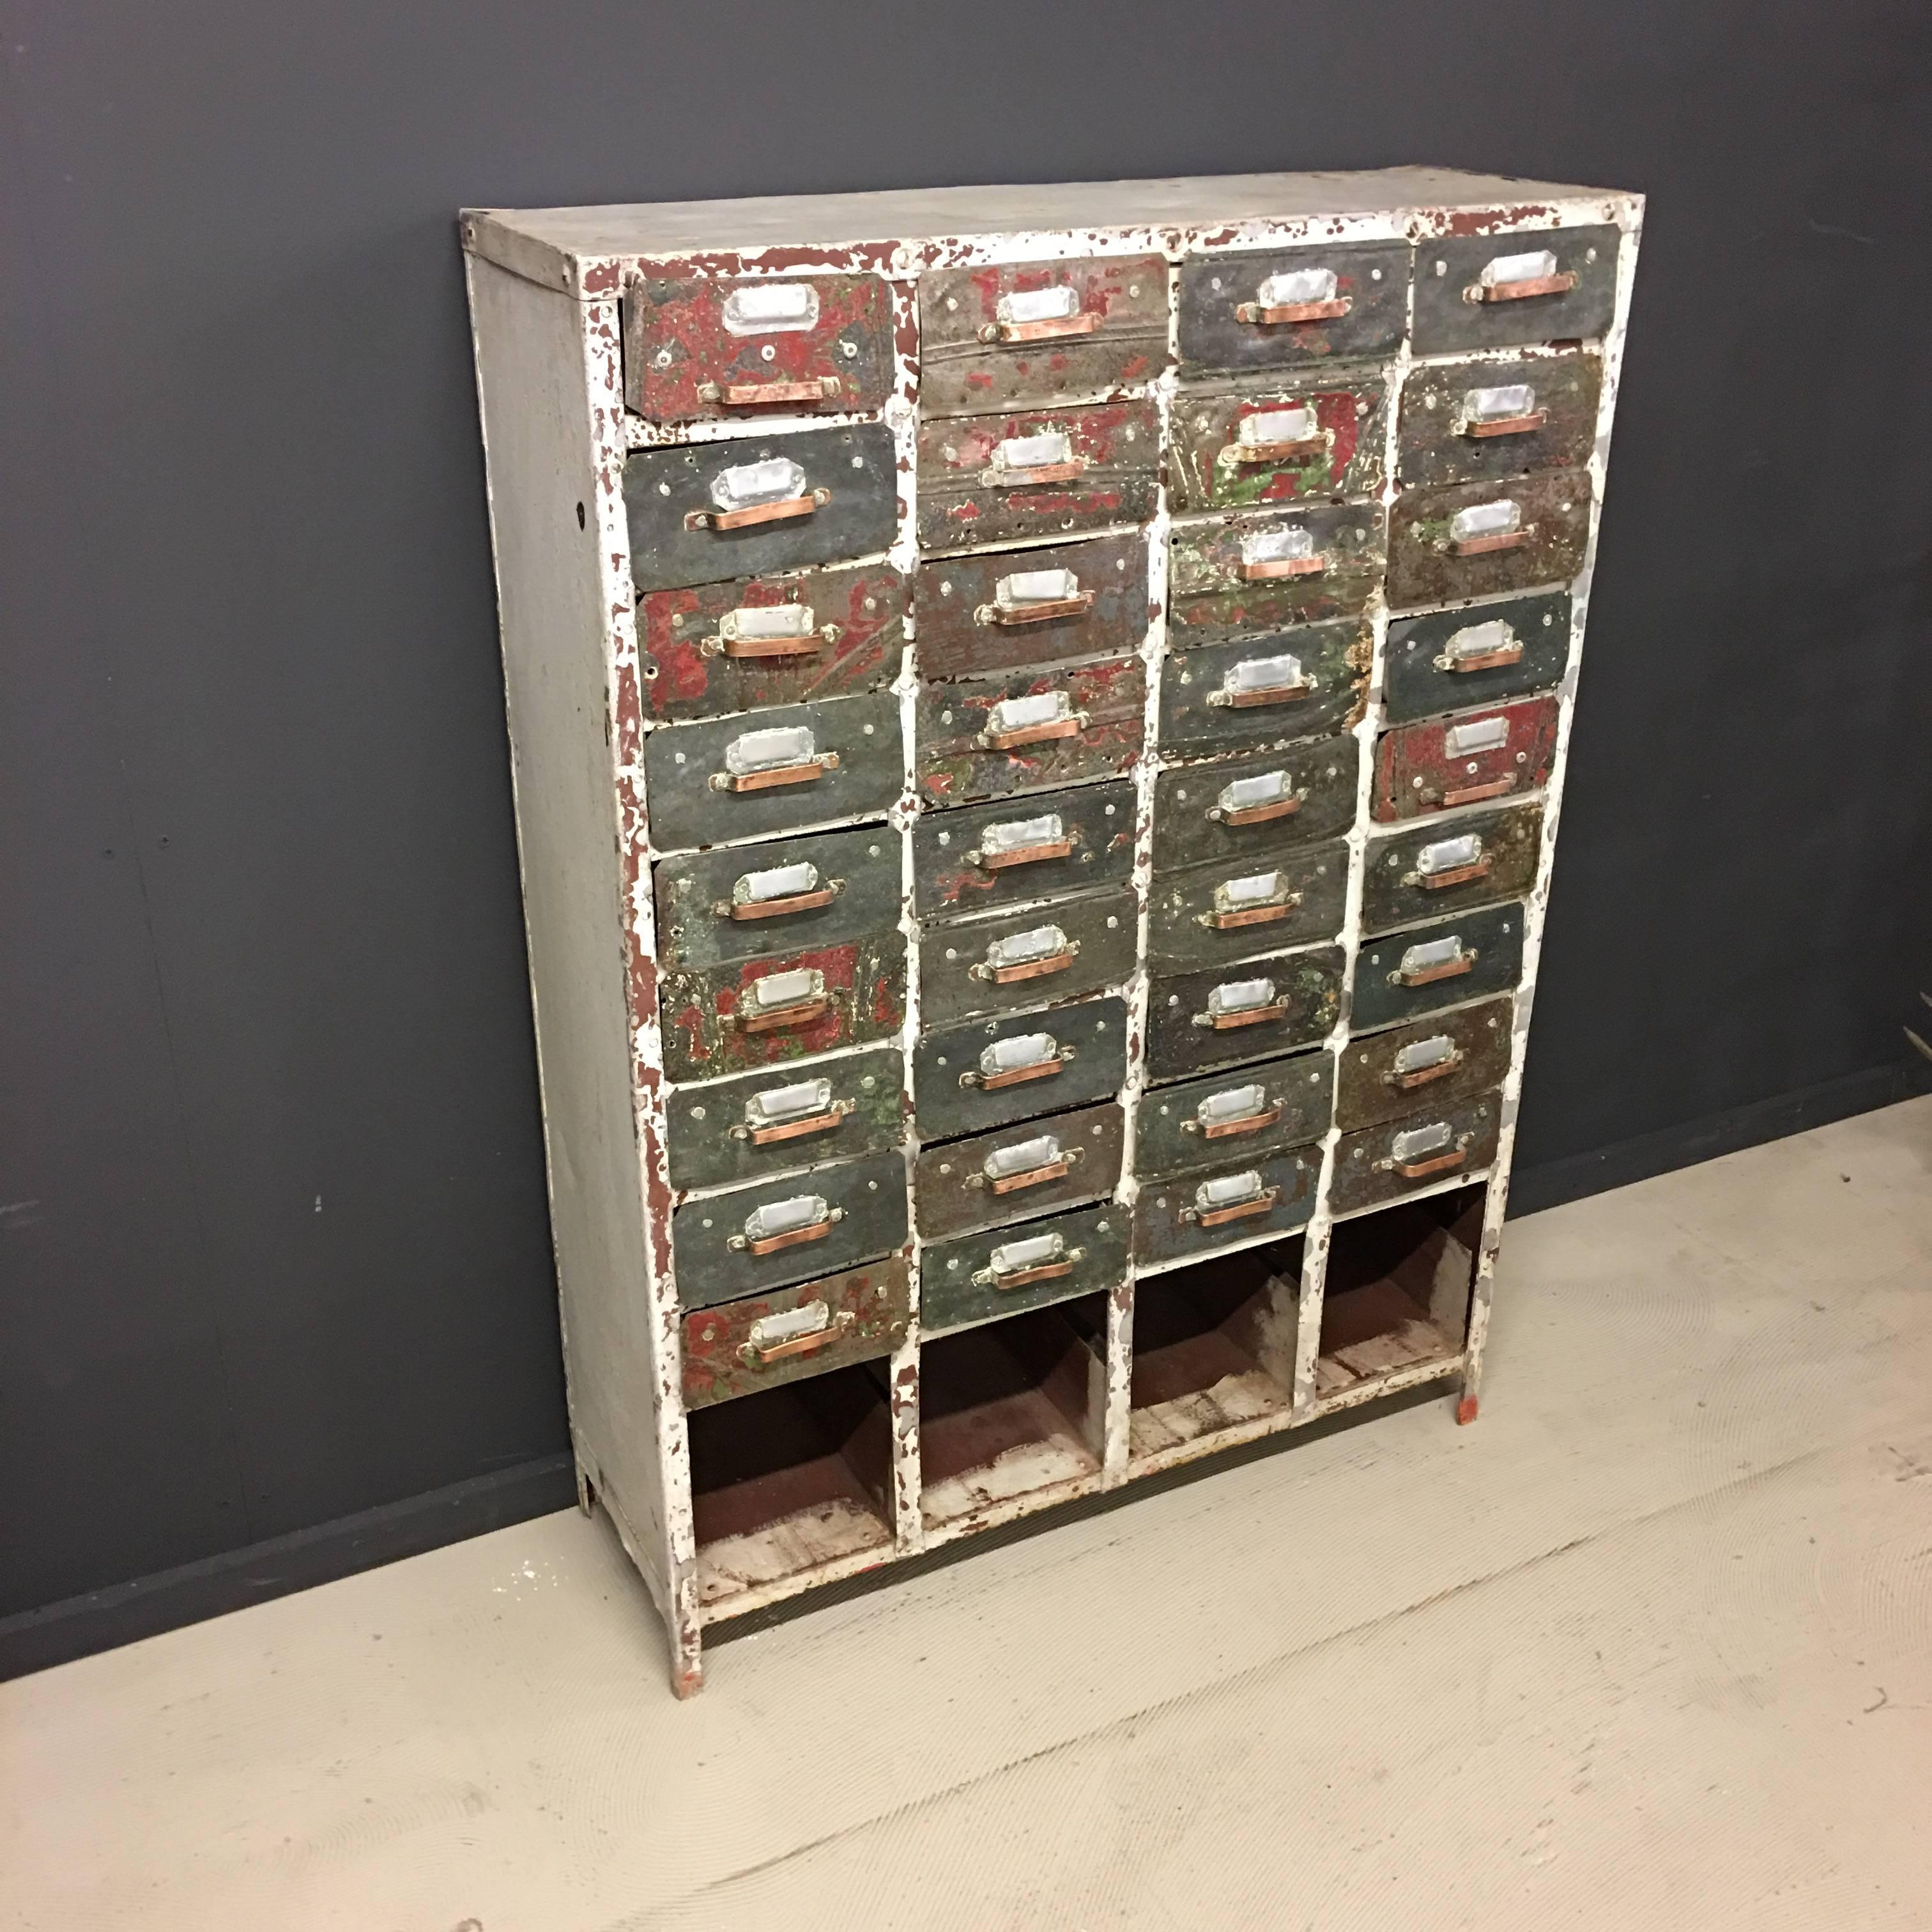 This French Industrial drawer cabinet was made during or shortly after the war. Made by hand, using old, left over, materials, all 36 drawers are made from oil cans and the handles are made from copper. Each drawer is unique and has label holders.